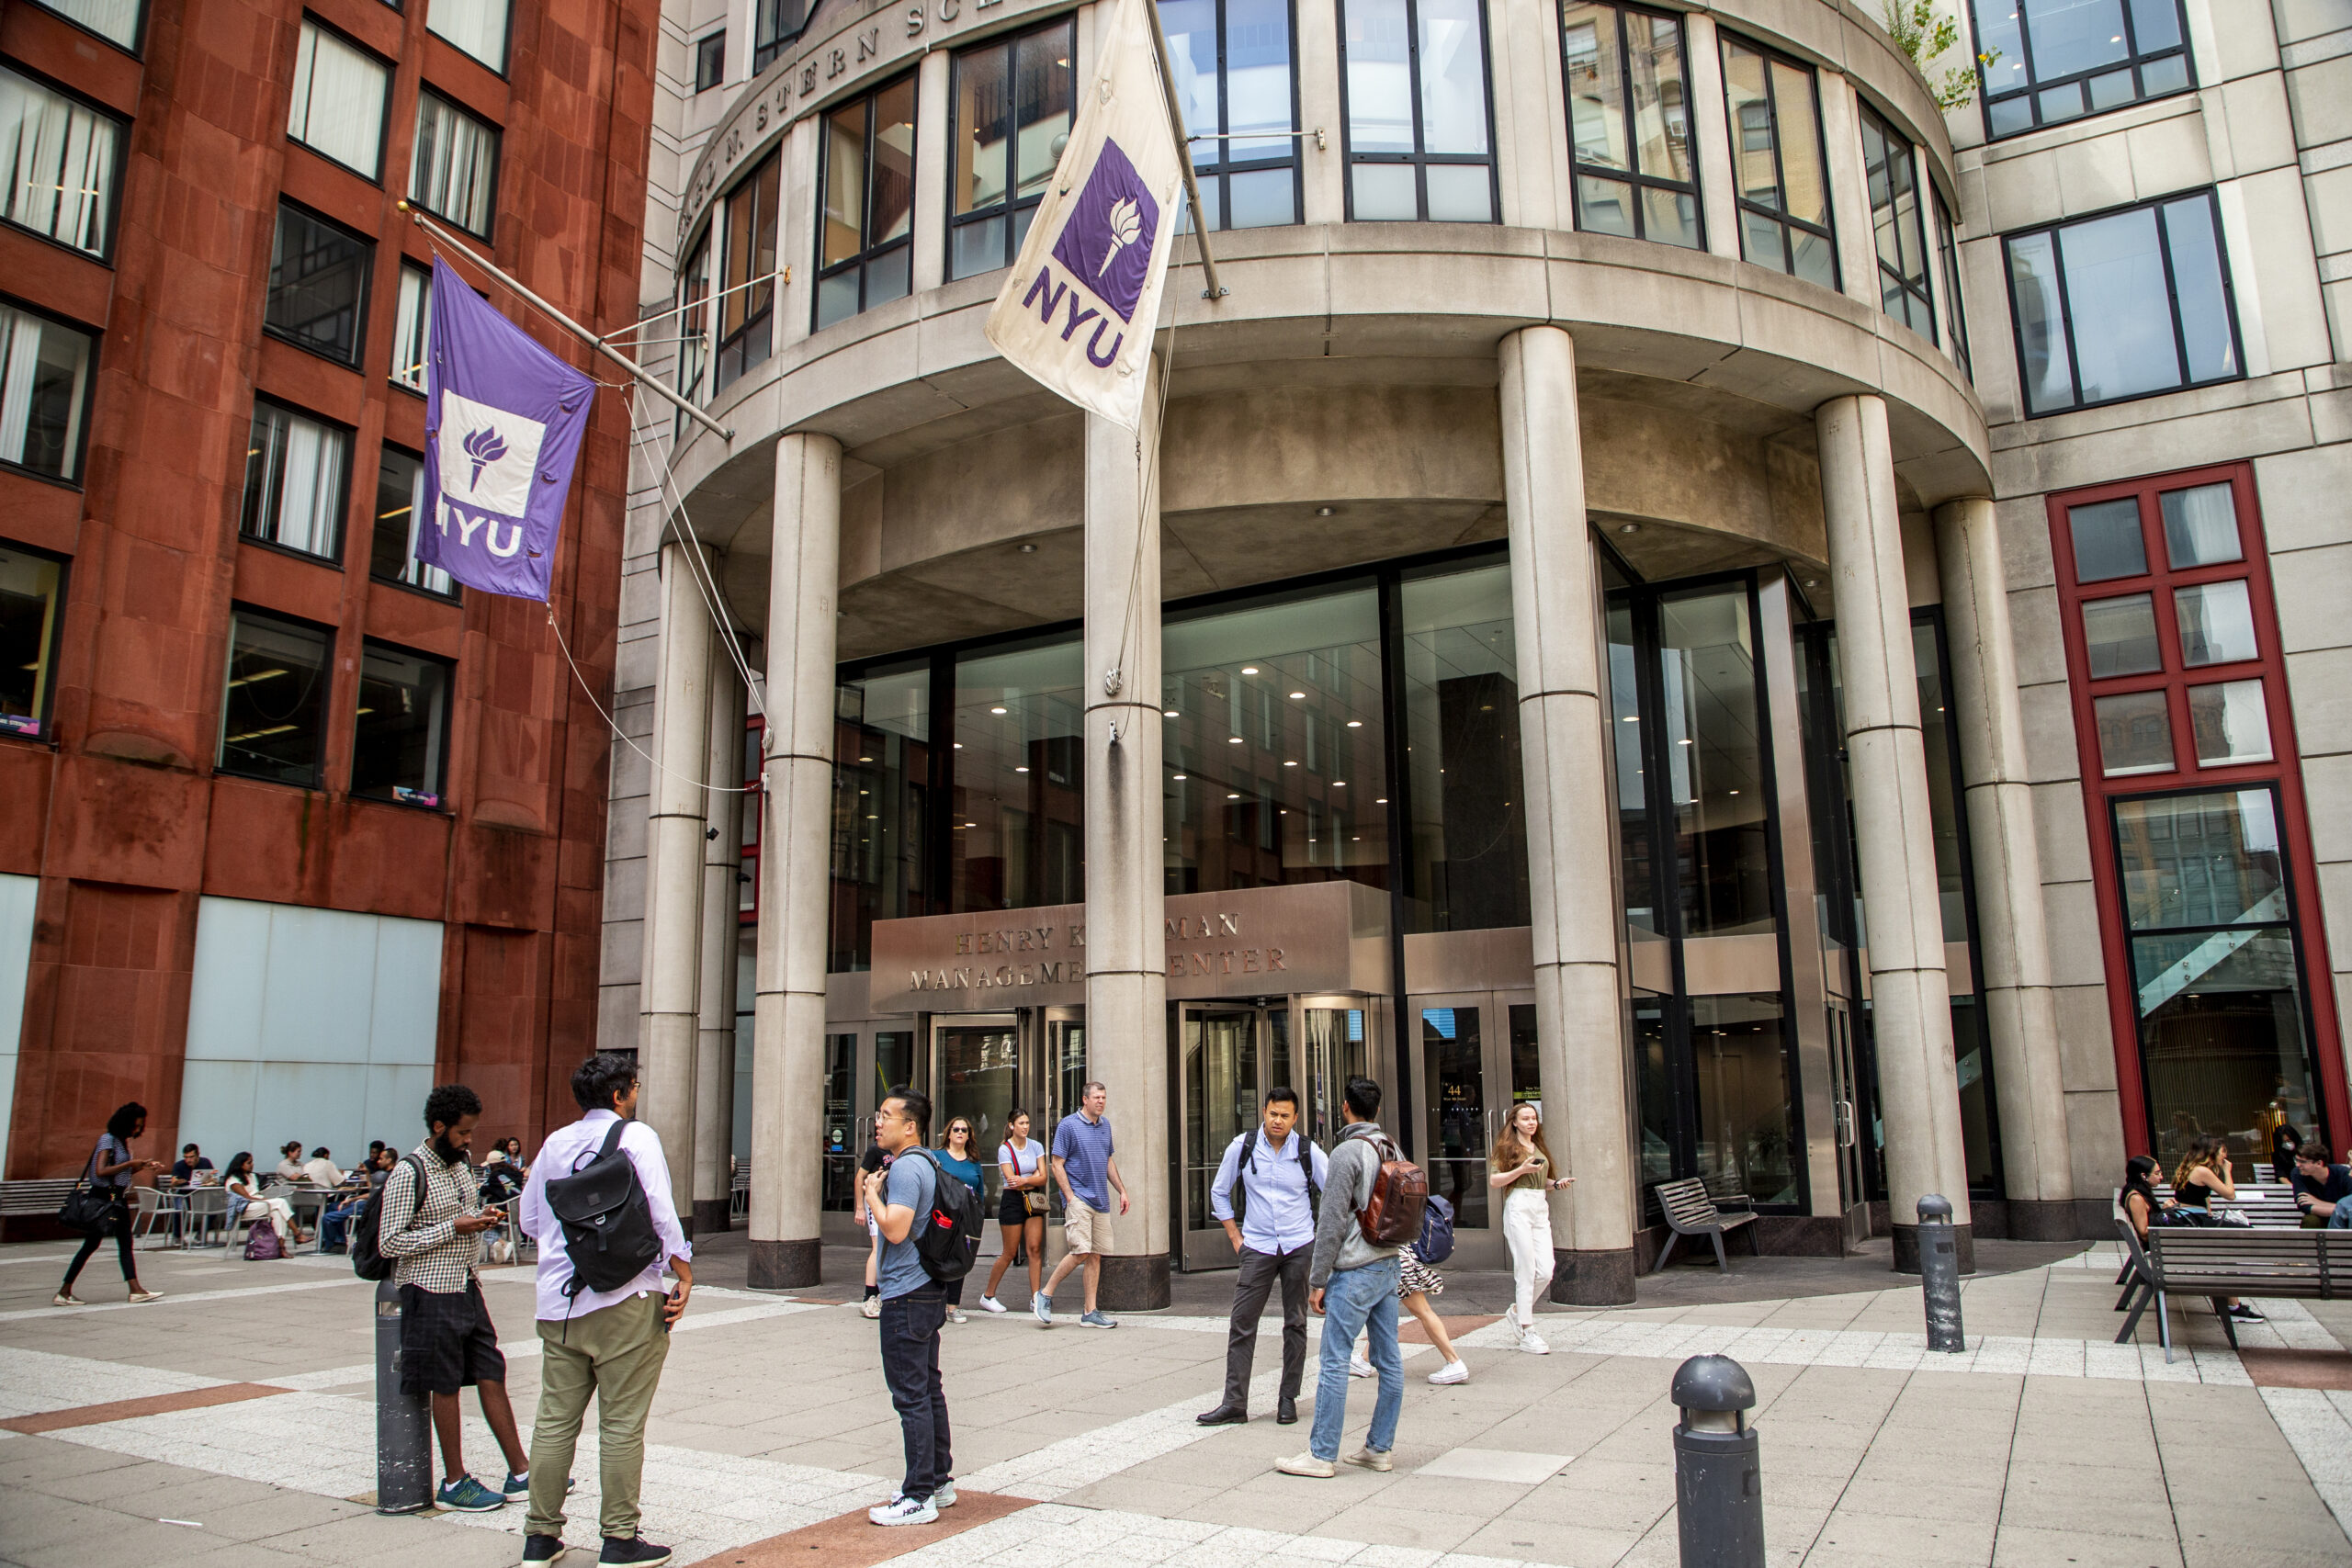 Exterior of the NYU Stern School of Business.